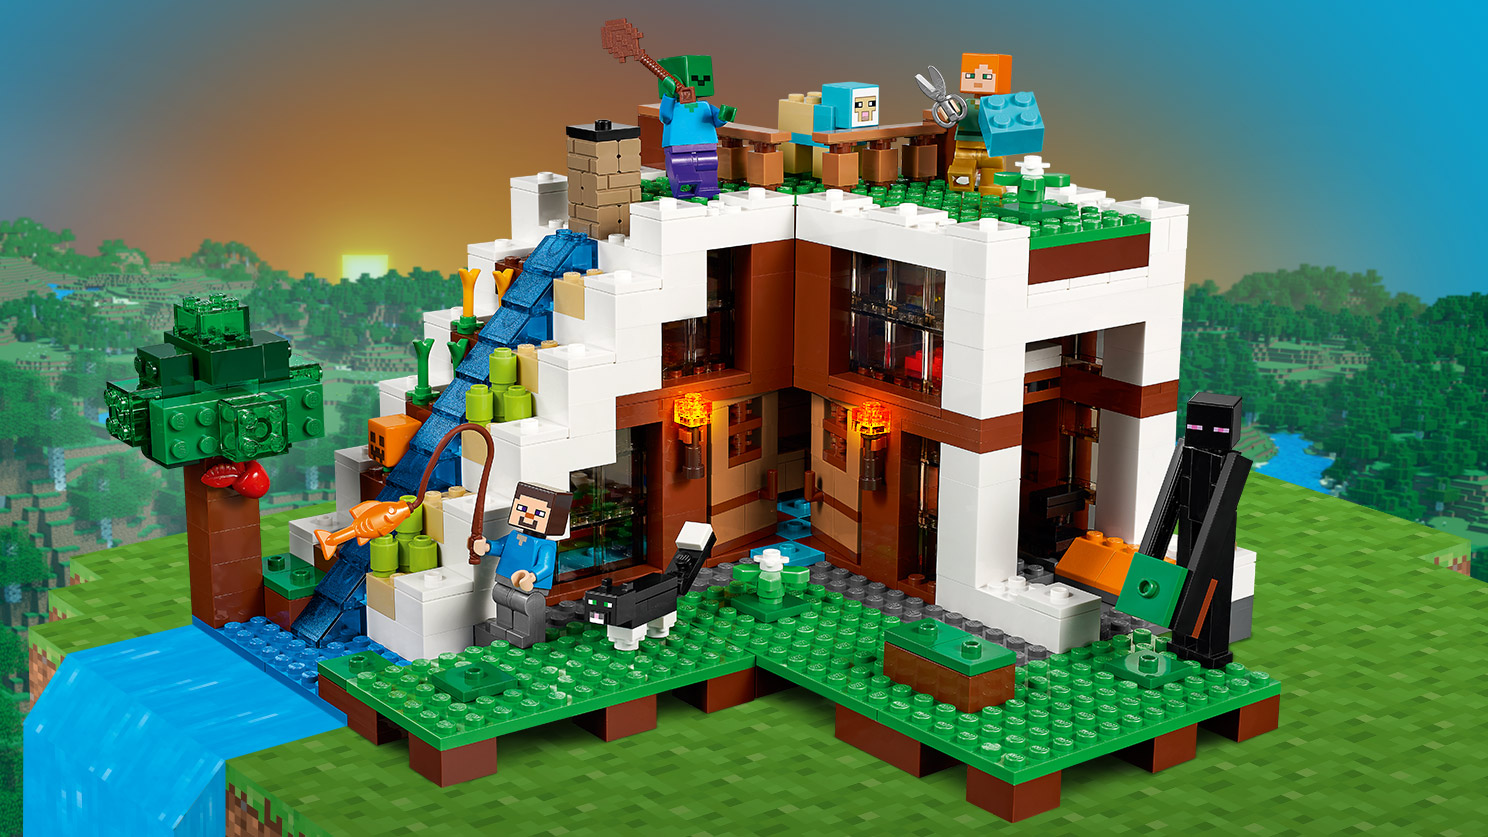 LEGO Minecraft - 21134 The Waterfall Base - Steve and Alex have joined forces and built the ultimate shelter with rooftop garden, waterfall and secret lava entrance .